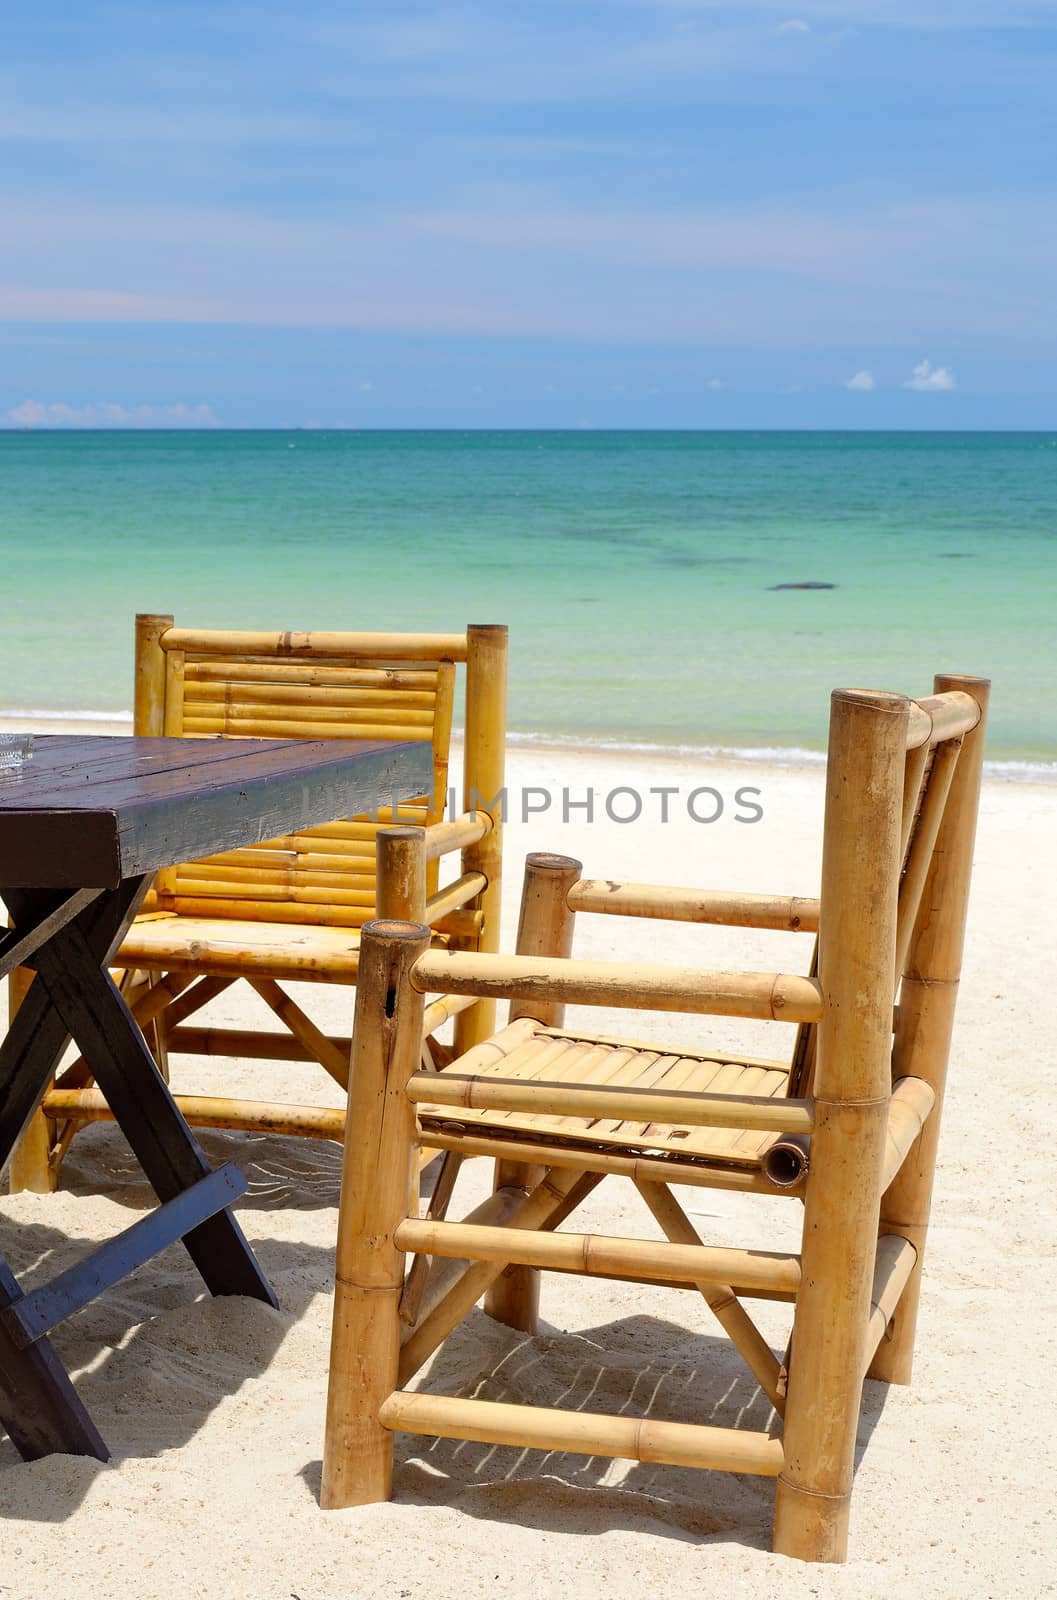 Chairs and table on the coral sandy beach with turquoise transparent water in the background, Koh Phangan, Thailand.